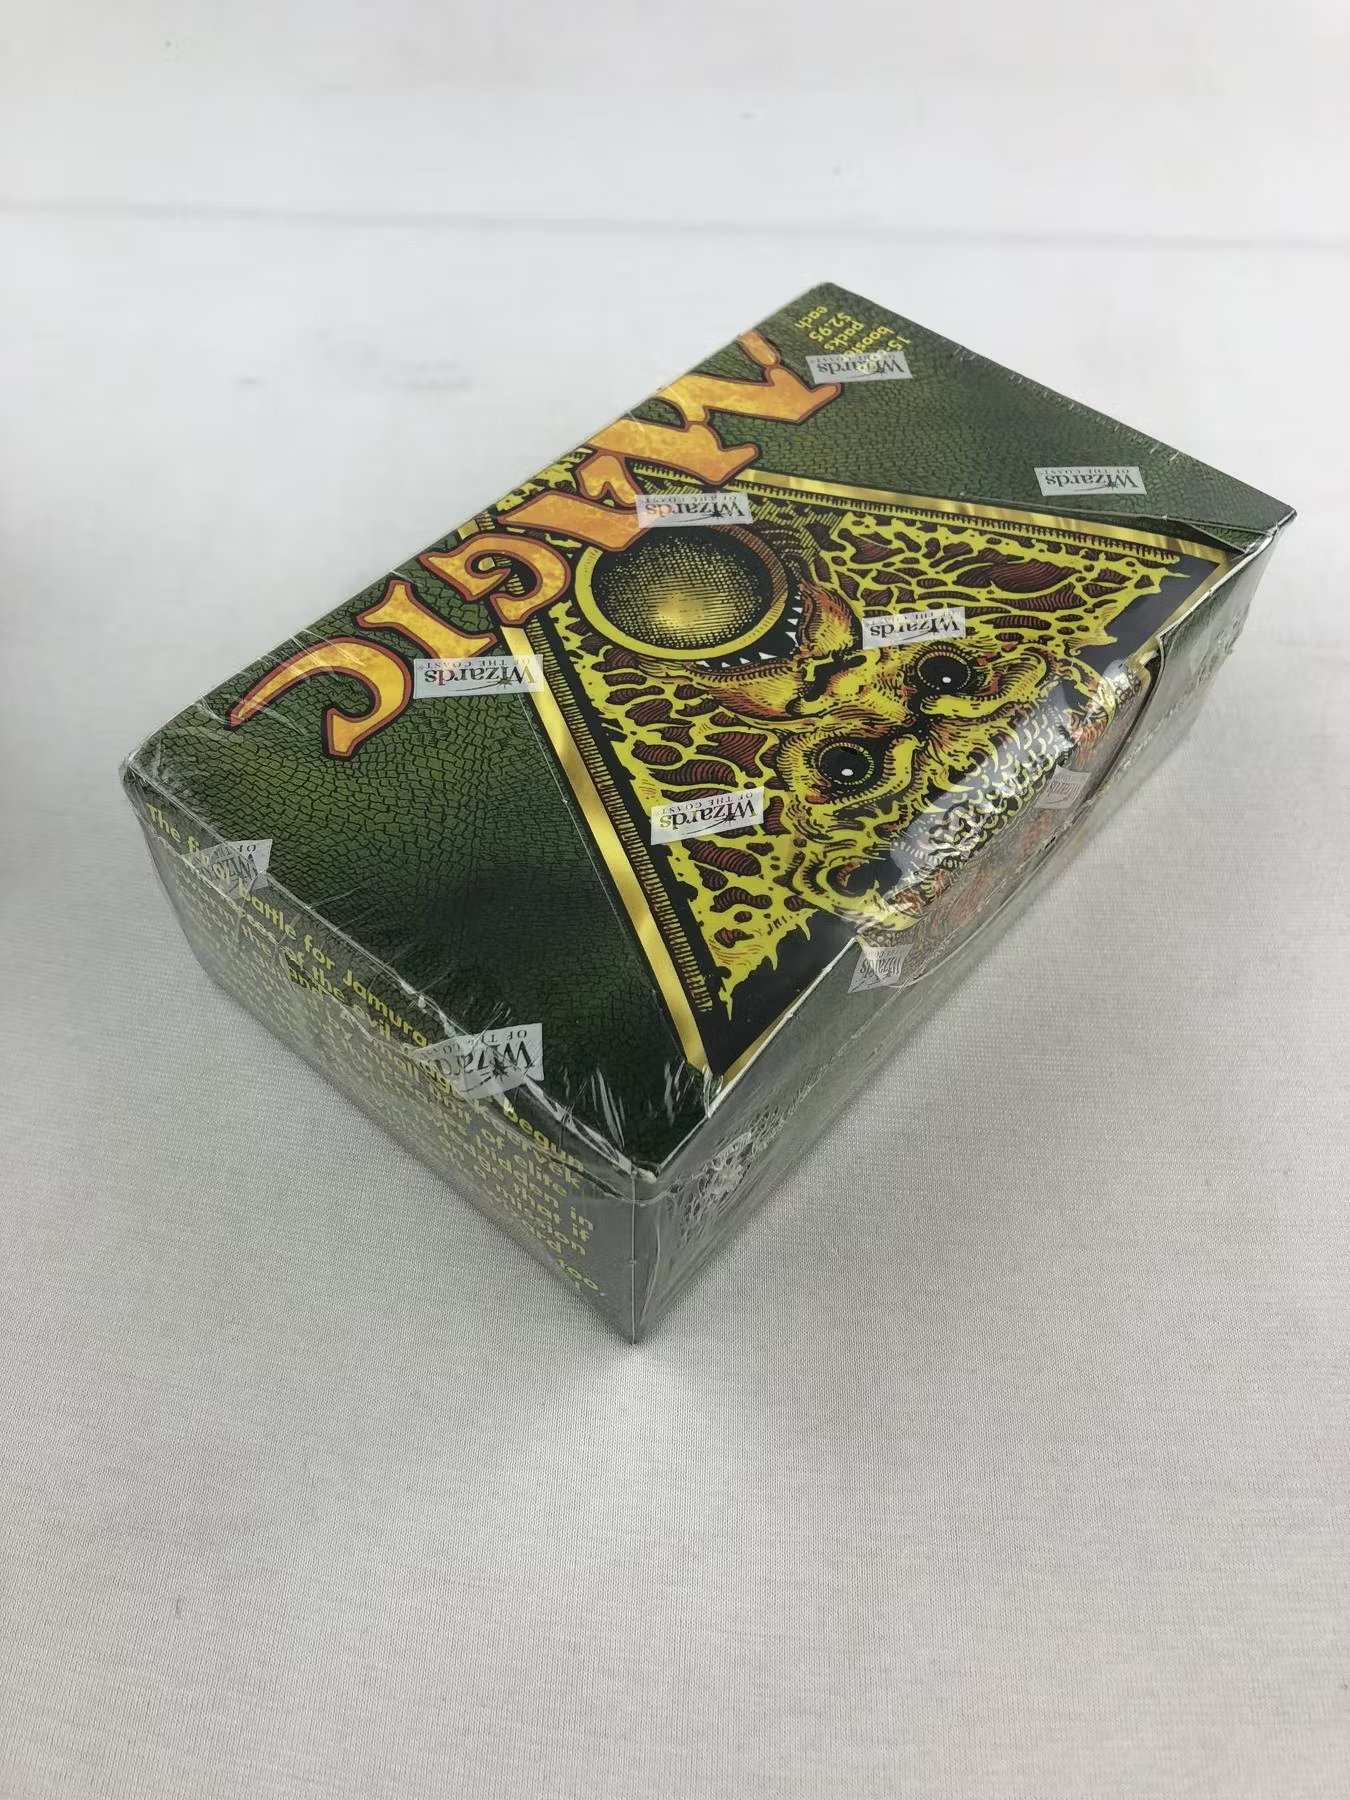 Magic the Gathering Visions Booster Box